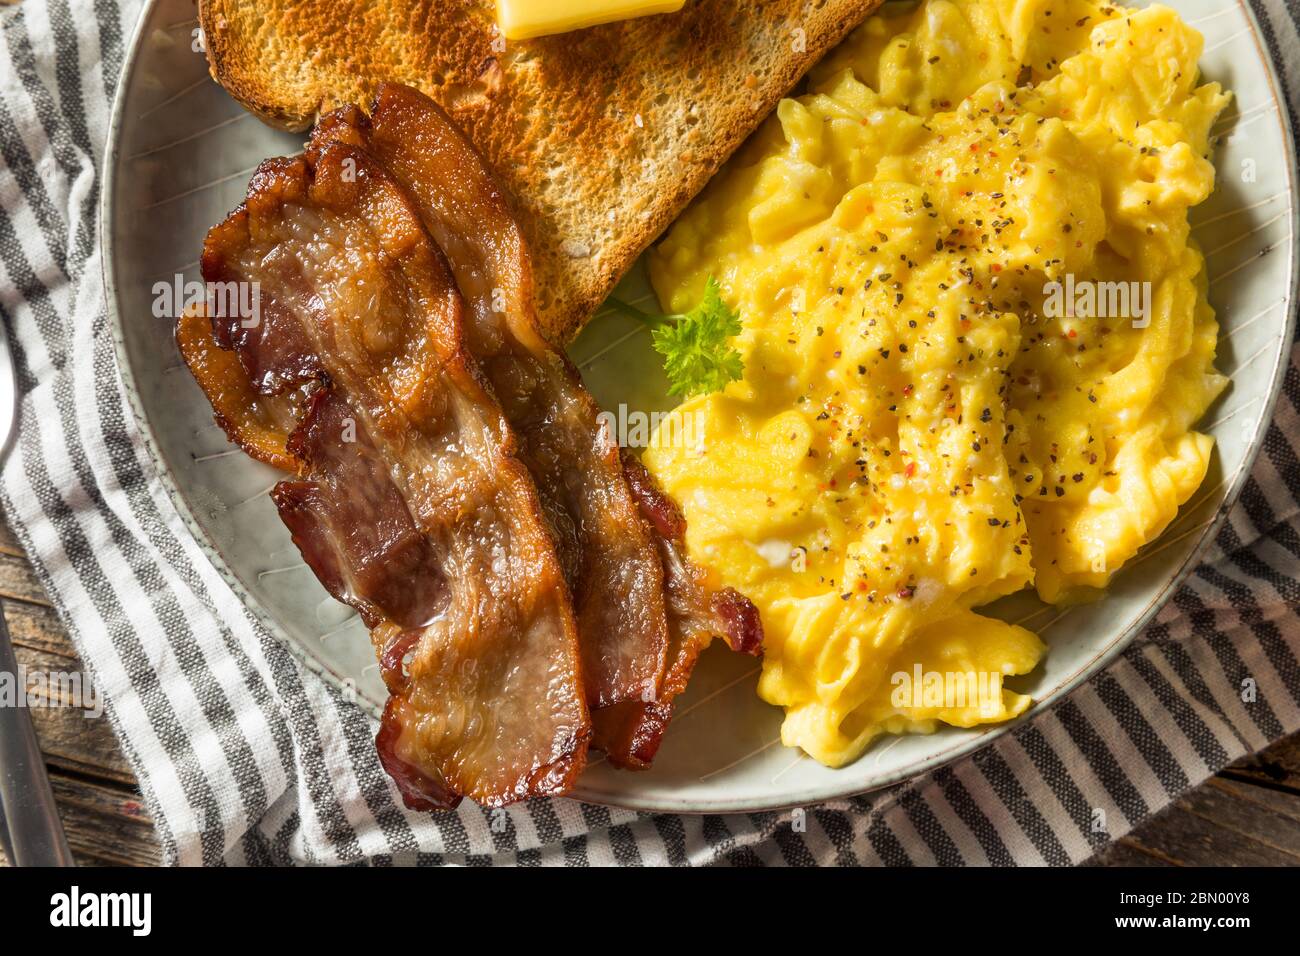 Homemade American Scrambled Egg Breakfast with Bacon and Toast Stock Photo